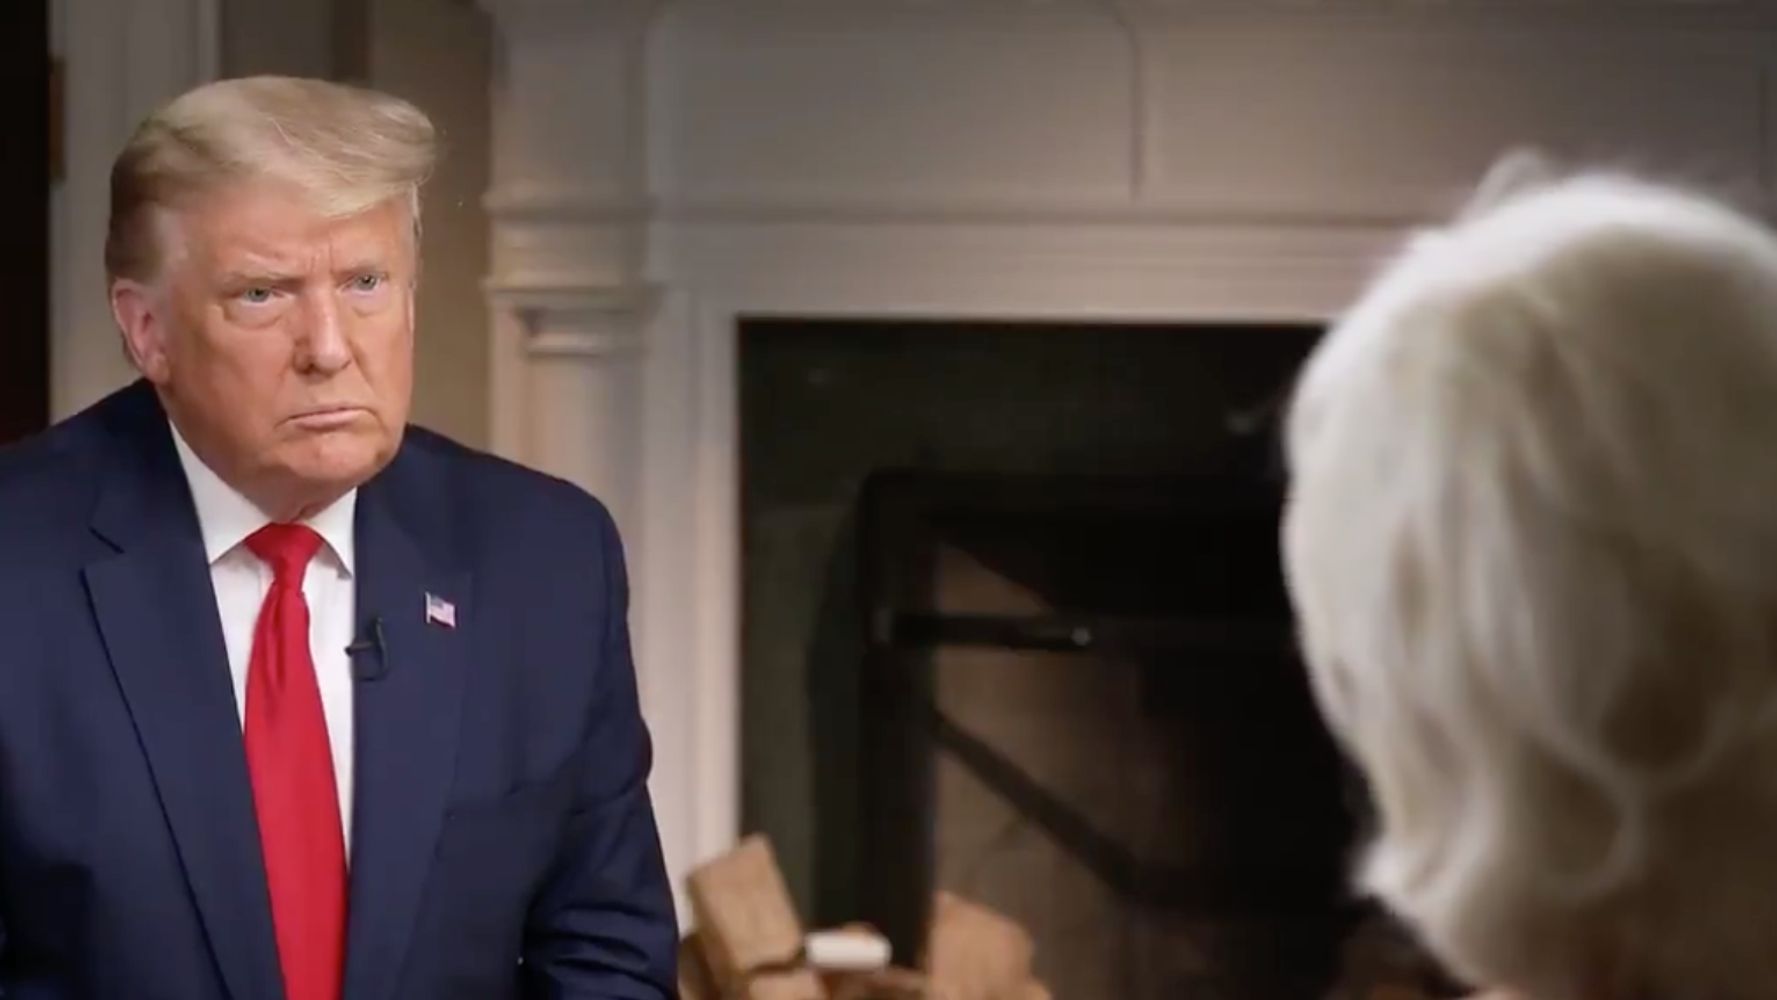 ‘That’s Enough.’ ’60 Minutes’ Airs Footage Of Trump Abruptly Leaving Interview